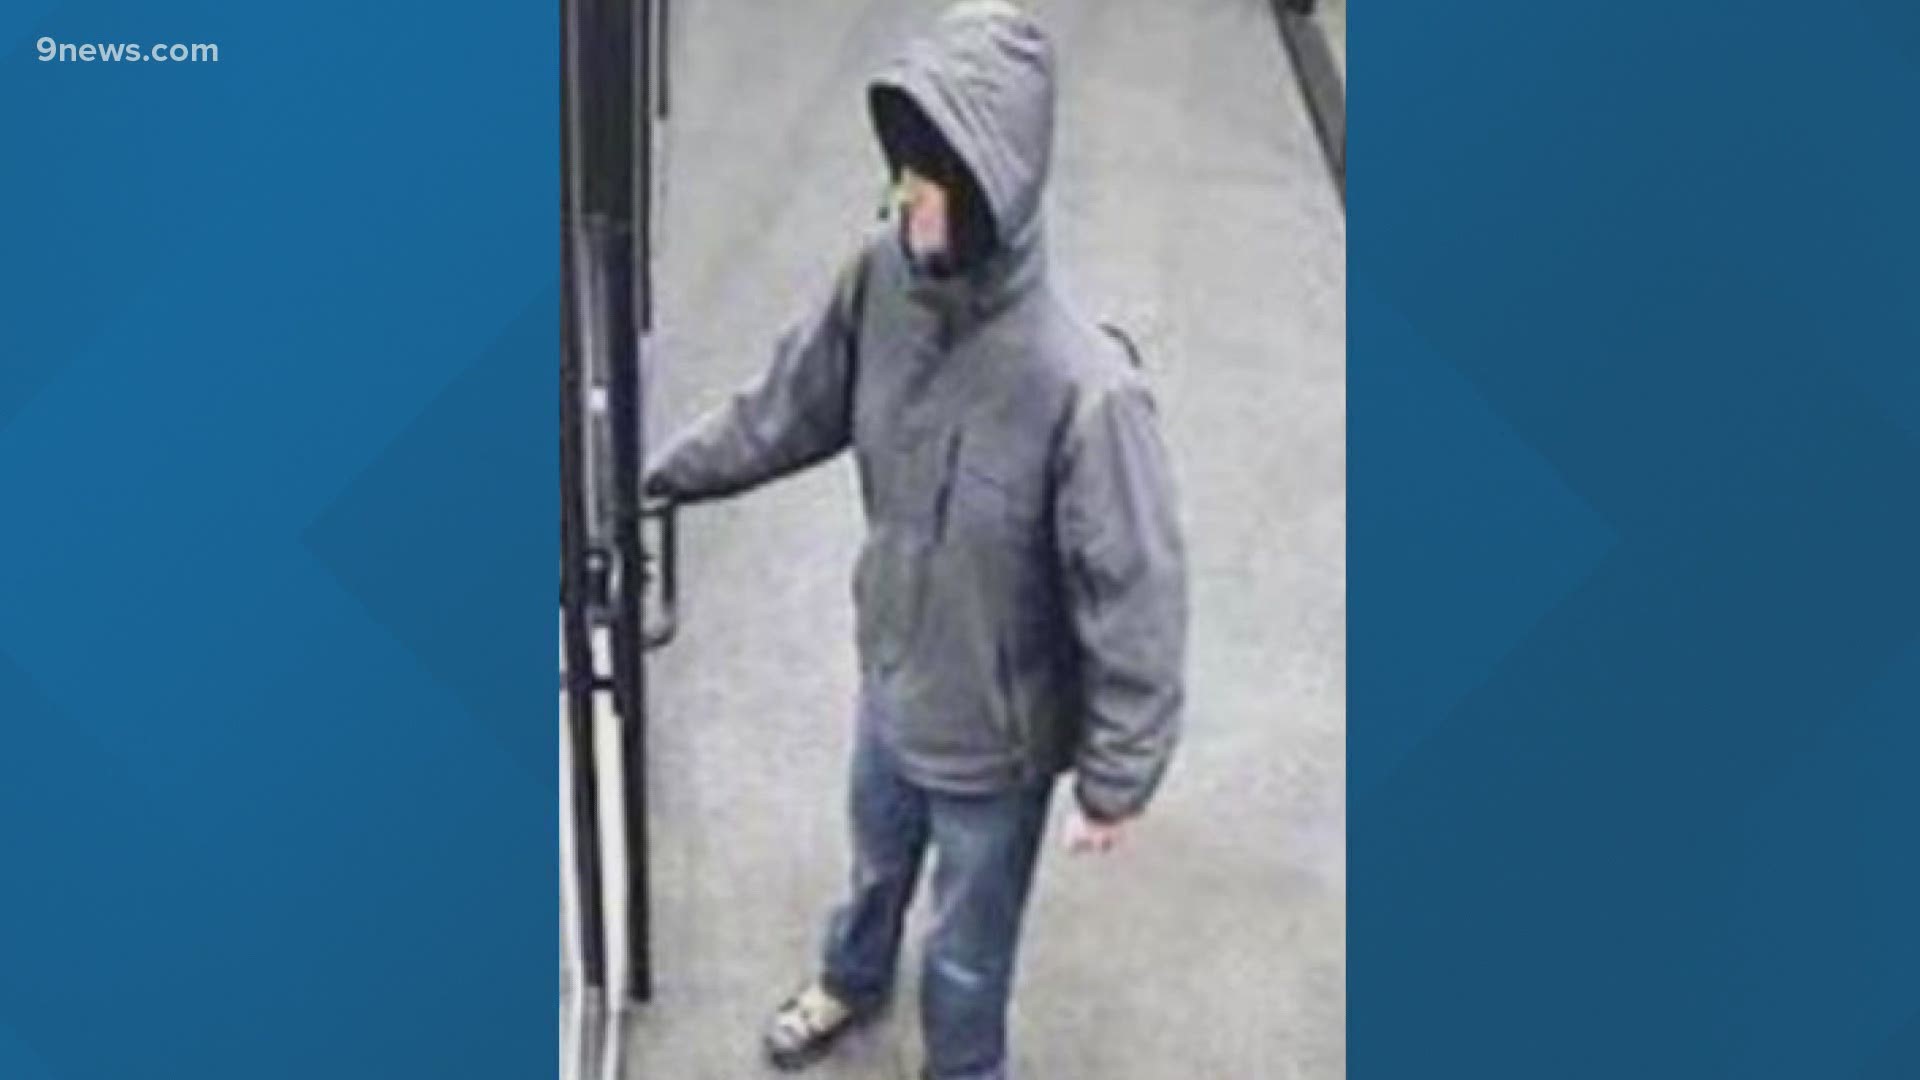 The FBI and Aurora Police Department are asking for help identifying the suspect.